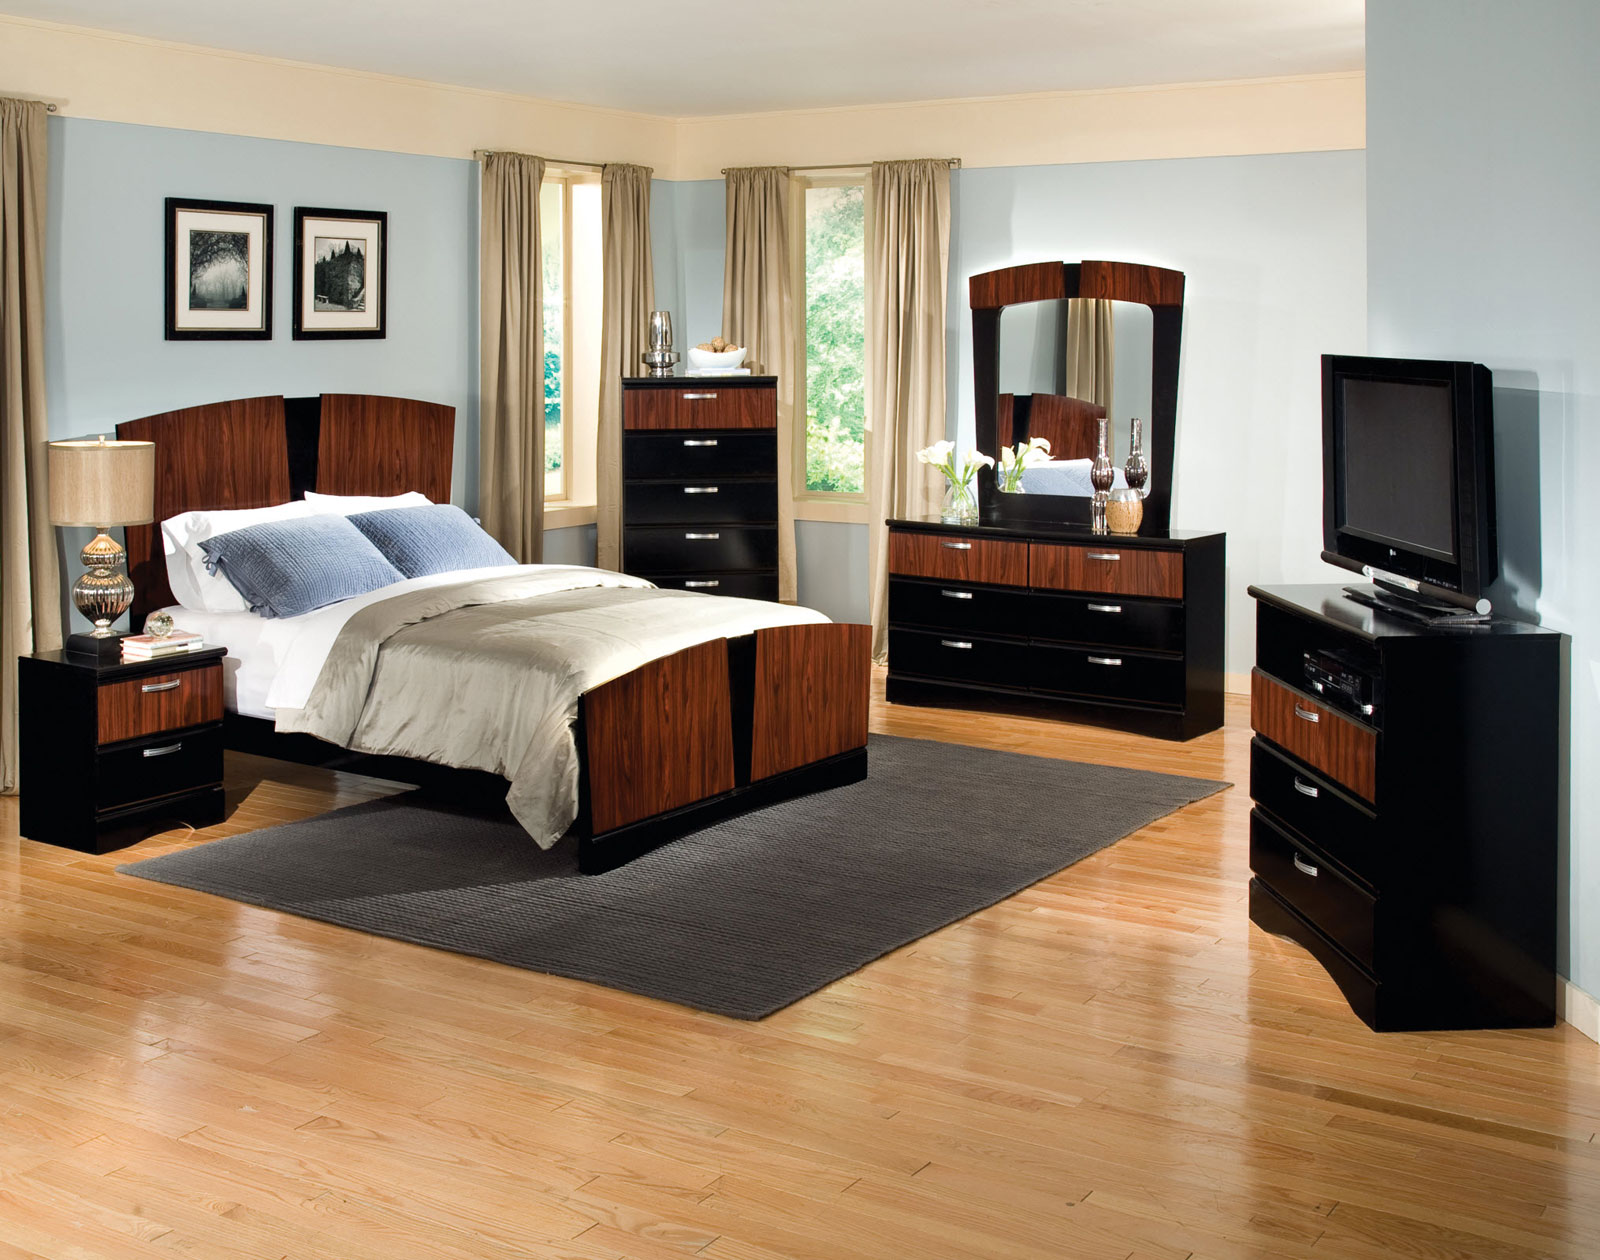 Black And Of Excellent Black And Brown Color Of Queen Bedroom Sets With White Queen Bed Furnished With Table Lamp With Nightstand And Completed With Vanity Table Also TV On Drawers Bedroom Queen Bedroom Sets For The Modern Style